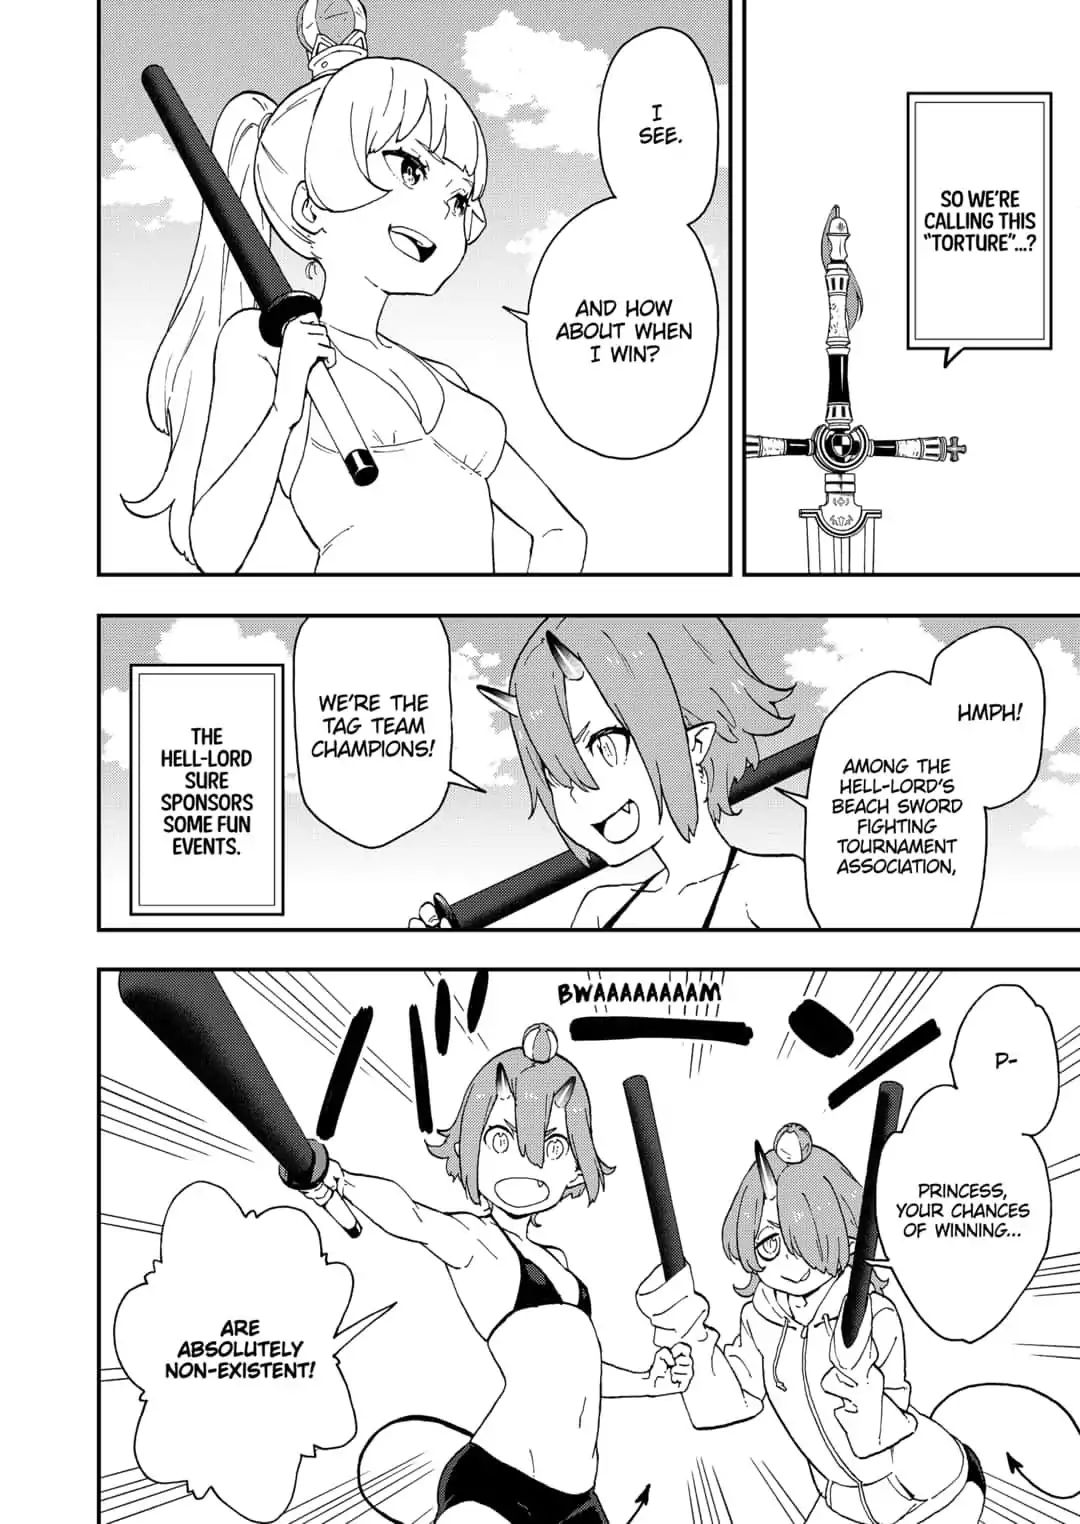 It's Time for "Interrogation", Princess! - chapter 29 - #2